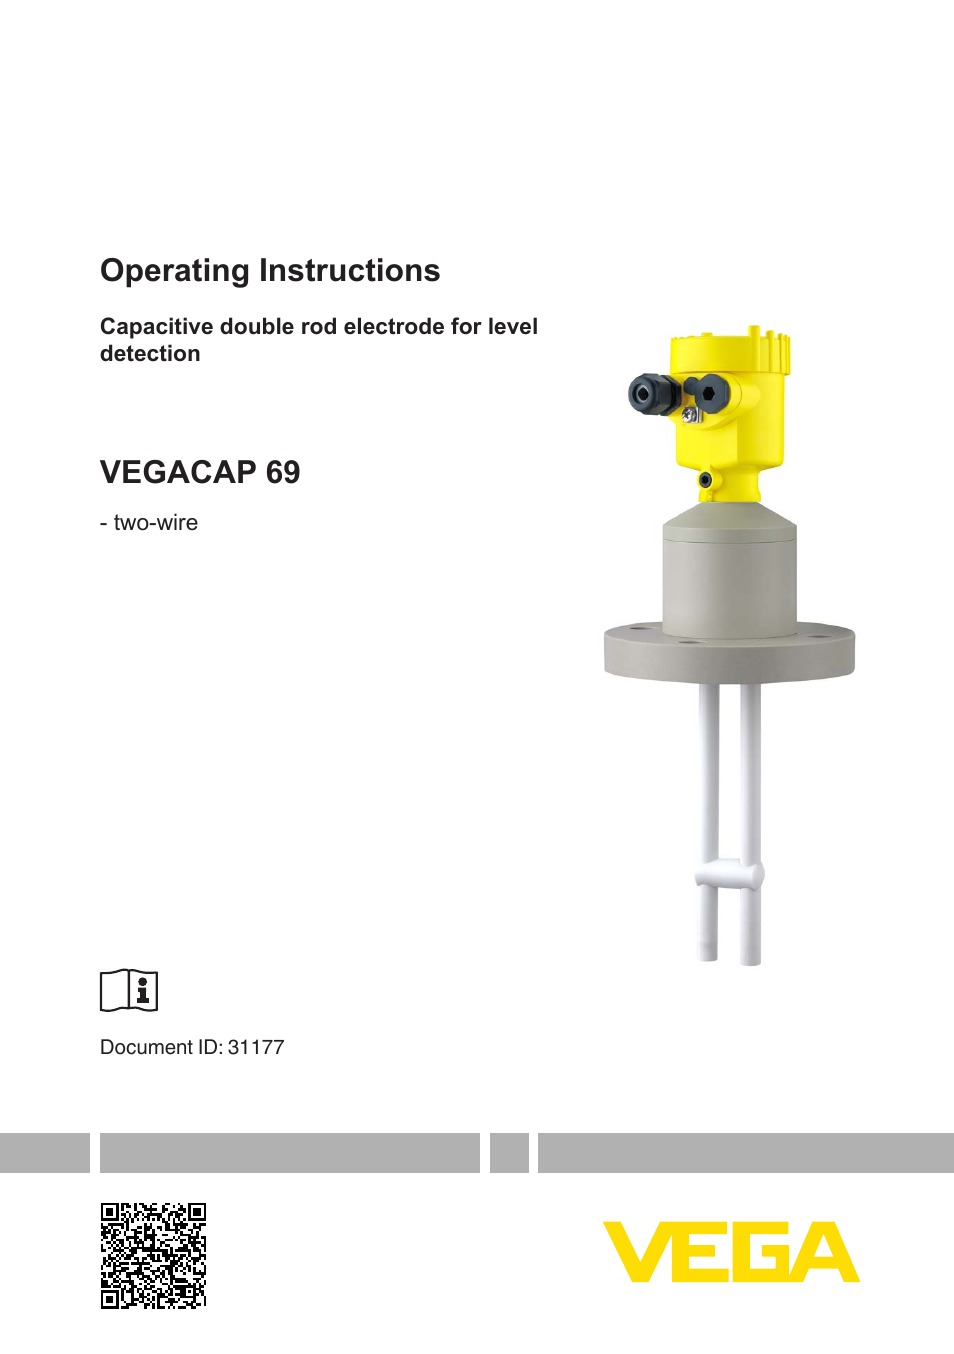 VEGACAP 69 - two-wire